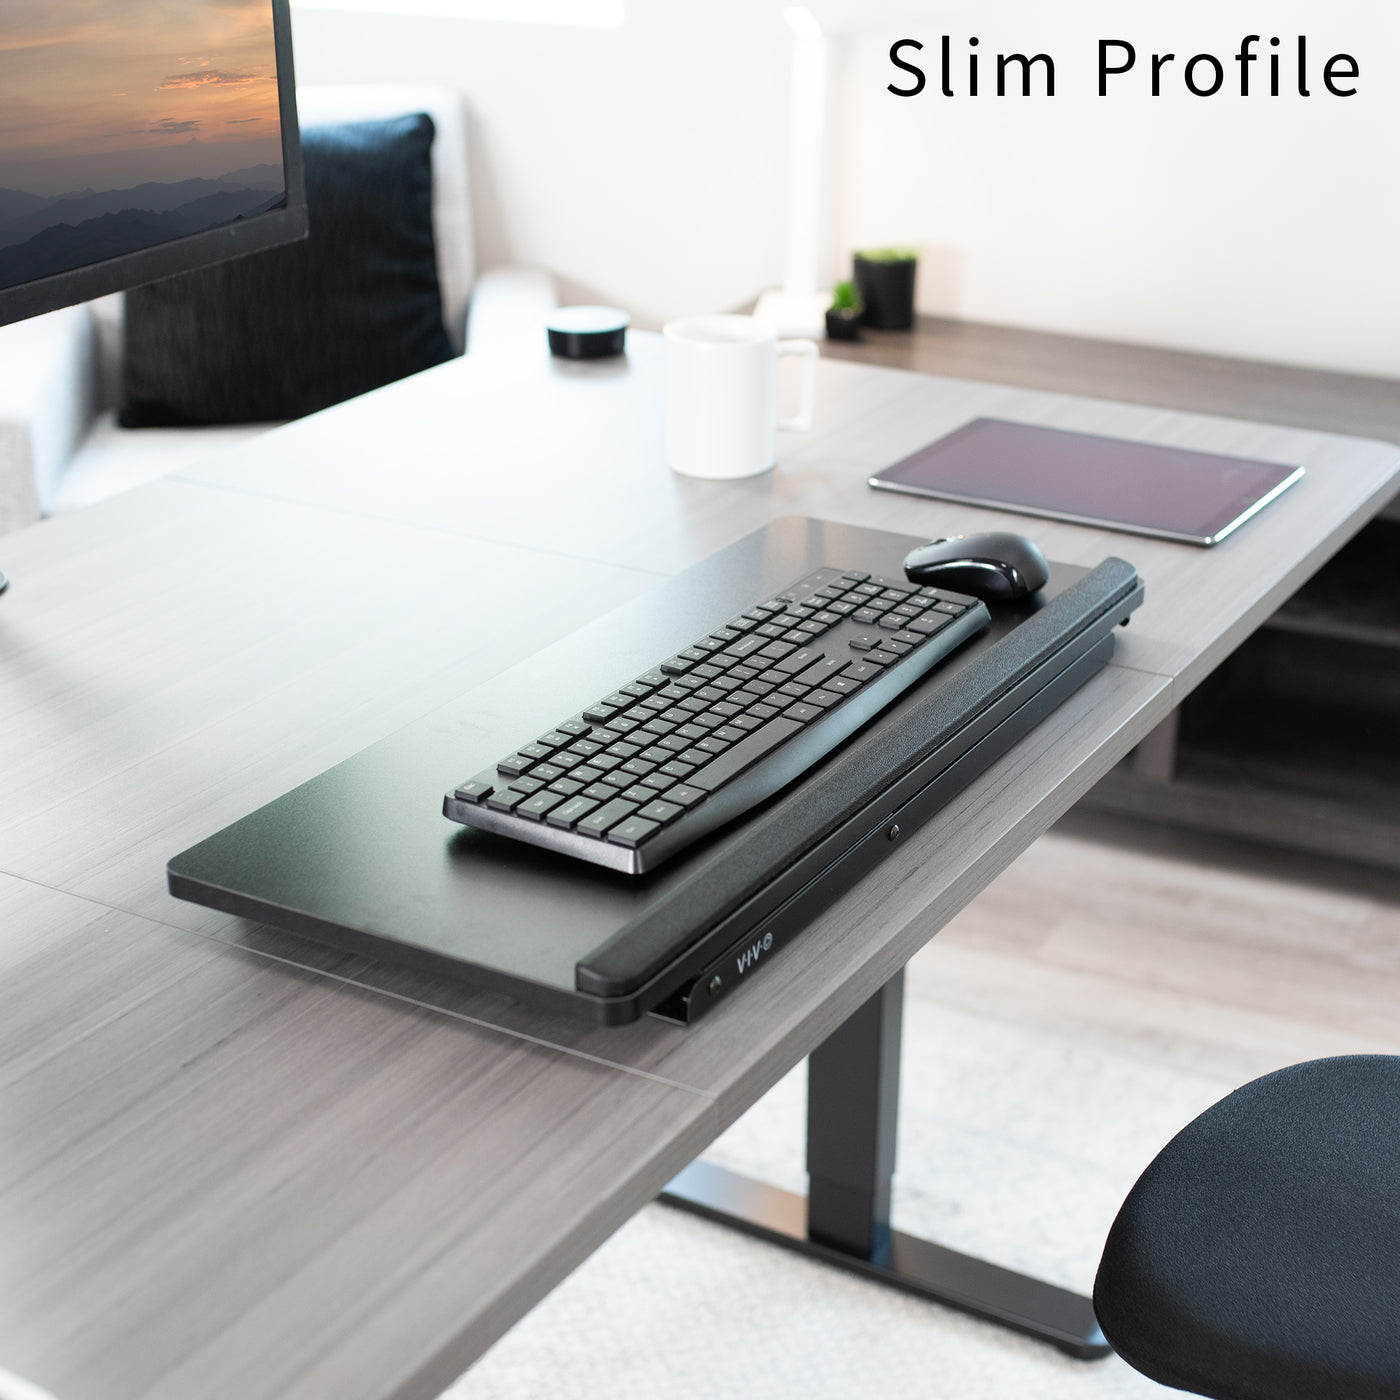 Transition from sitting to standing while maintaining a comfortable work position.